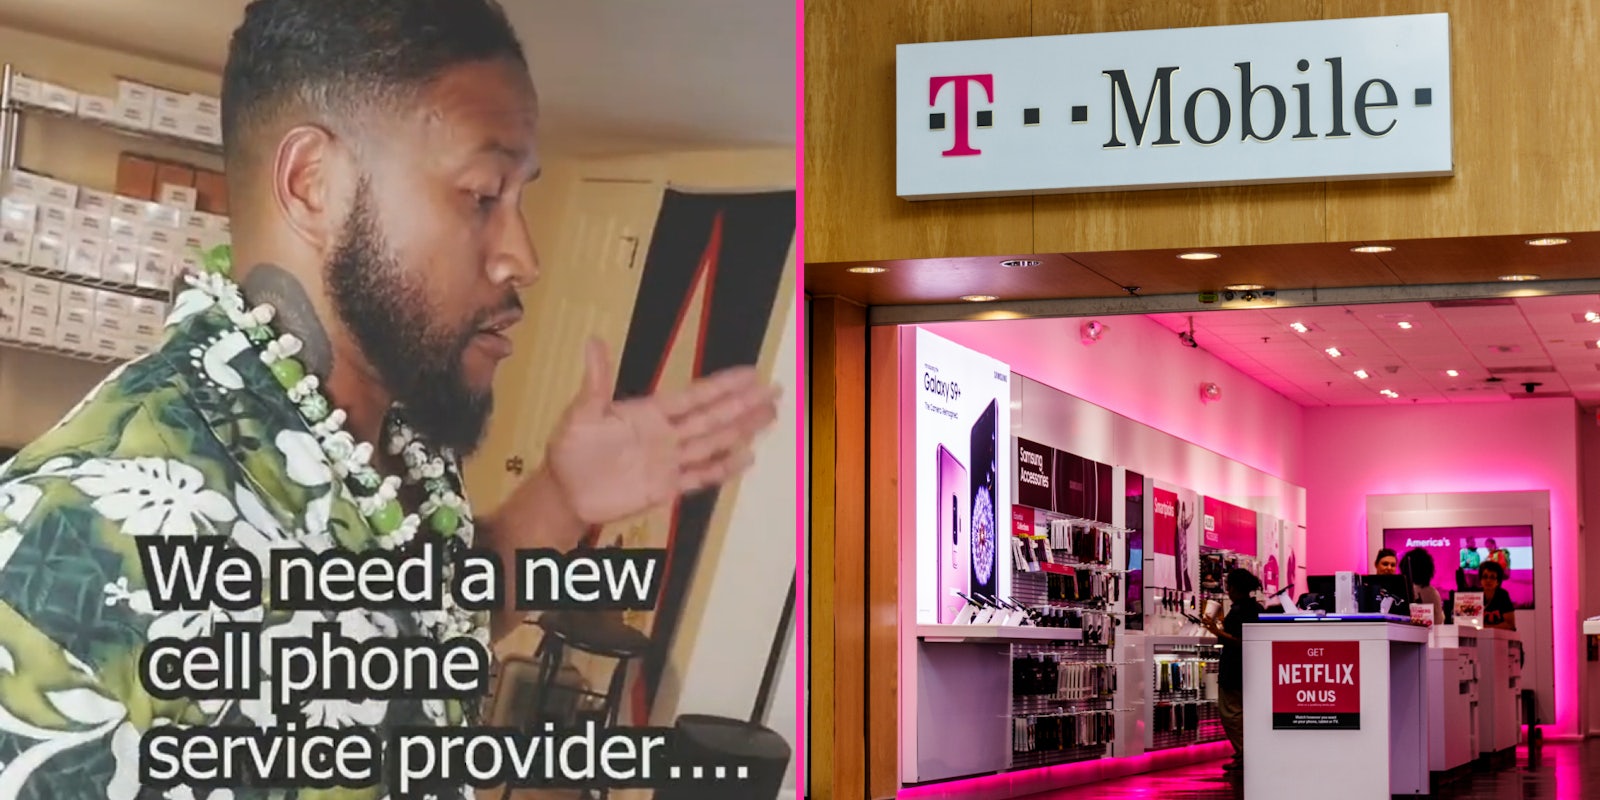 Man dancing like robot caption 'We need a new cell phone service provider...' (l) T Mobile store interior with sign out front (r)